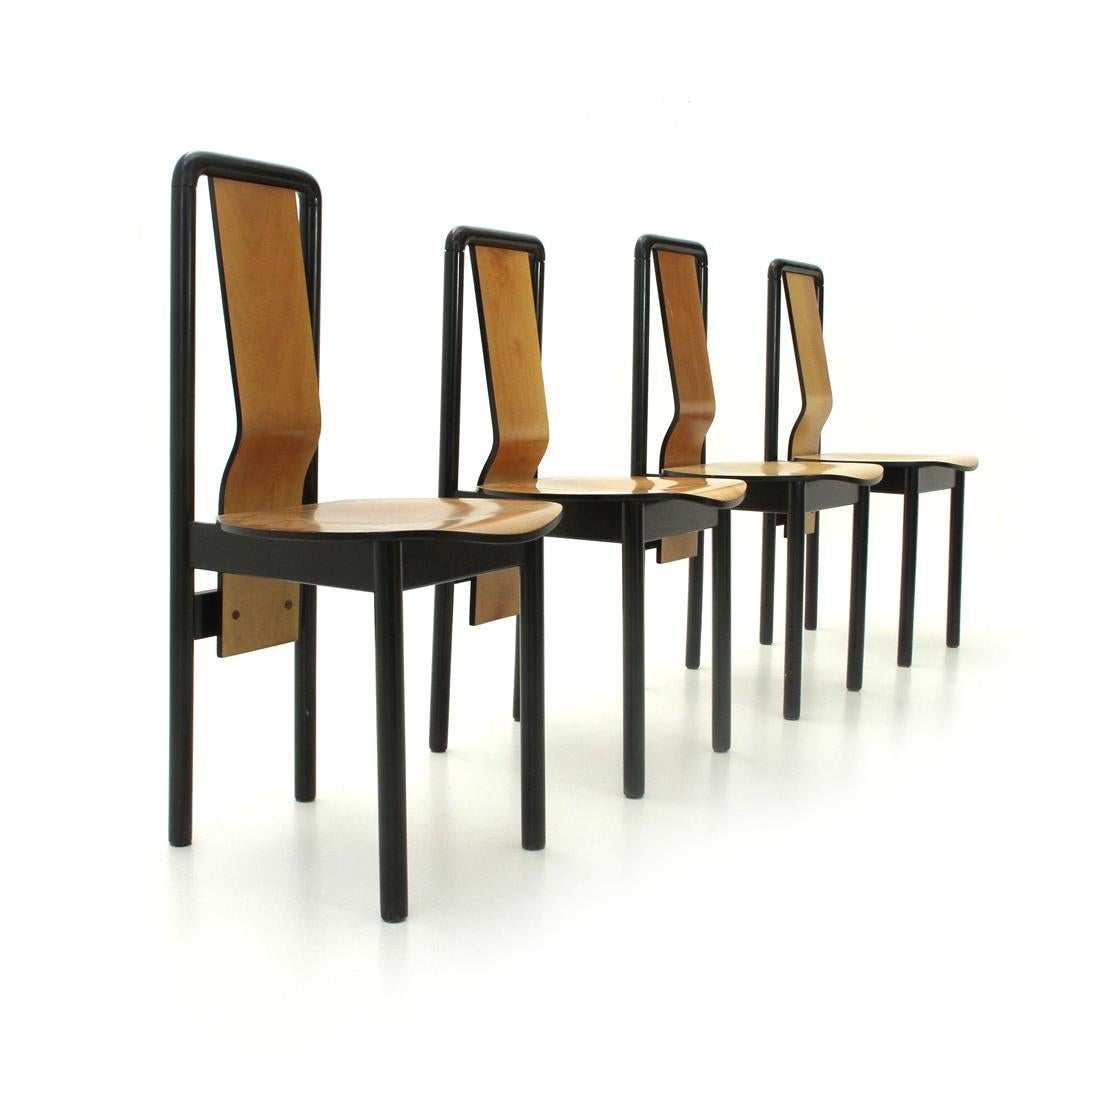 Set of four chairs, designed and produced by Pierre Cardin.
Black painted metal structure with curved plywood seat and back.
Structure in good condition, some signs due to normal use over time. One chair has the back lower than the